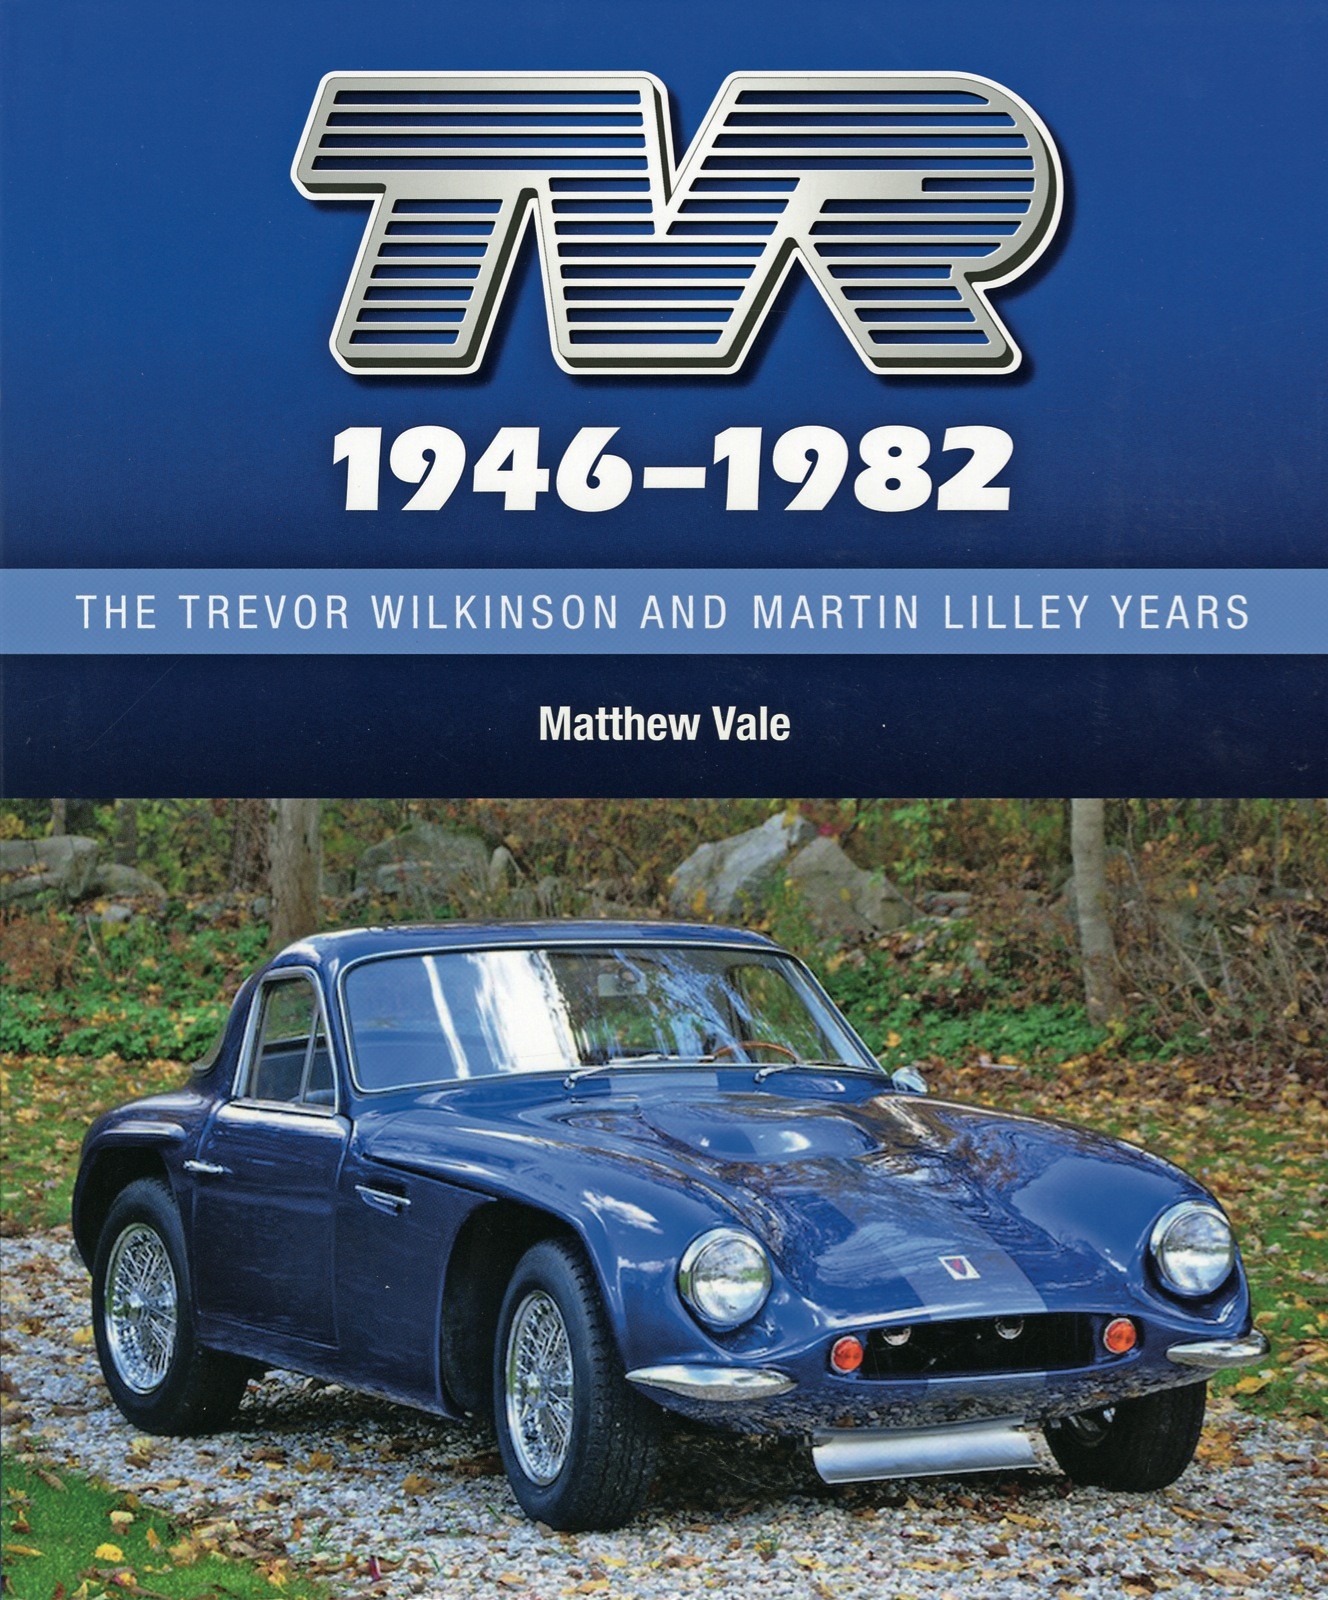 TVR 1946-1982 The Trevor Wilkinson and Martin Lilley years